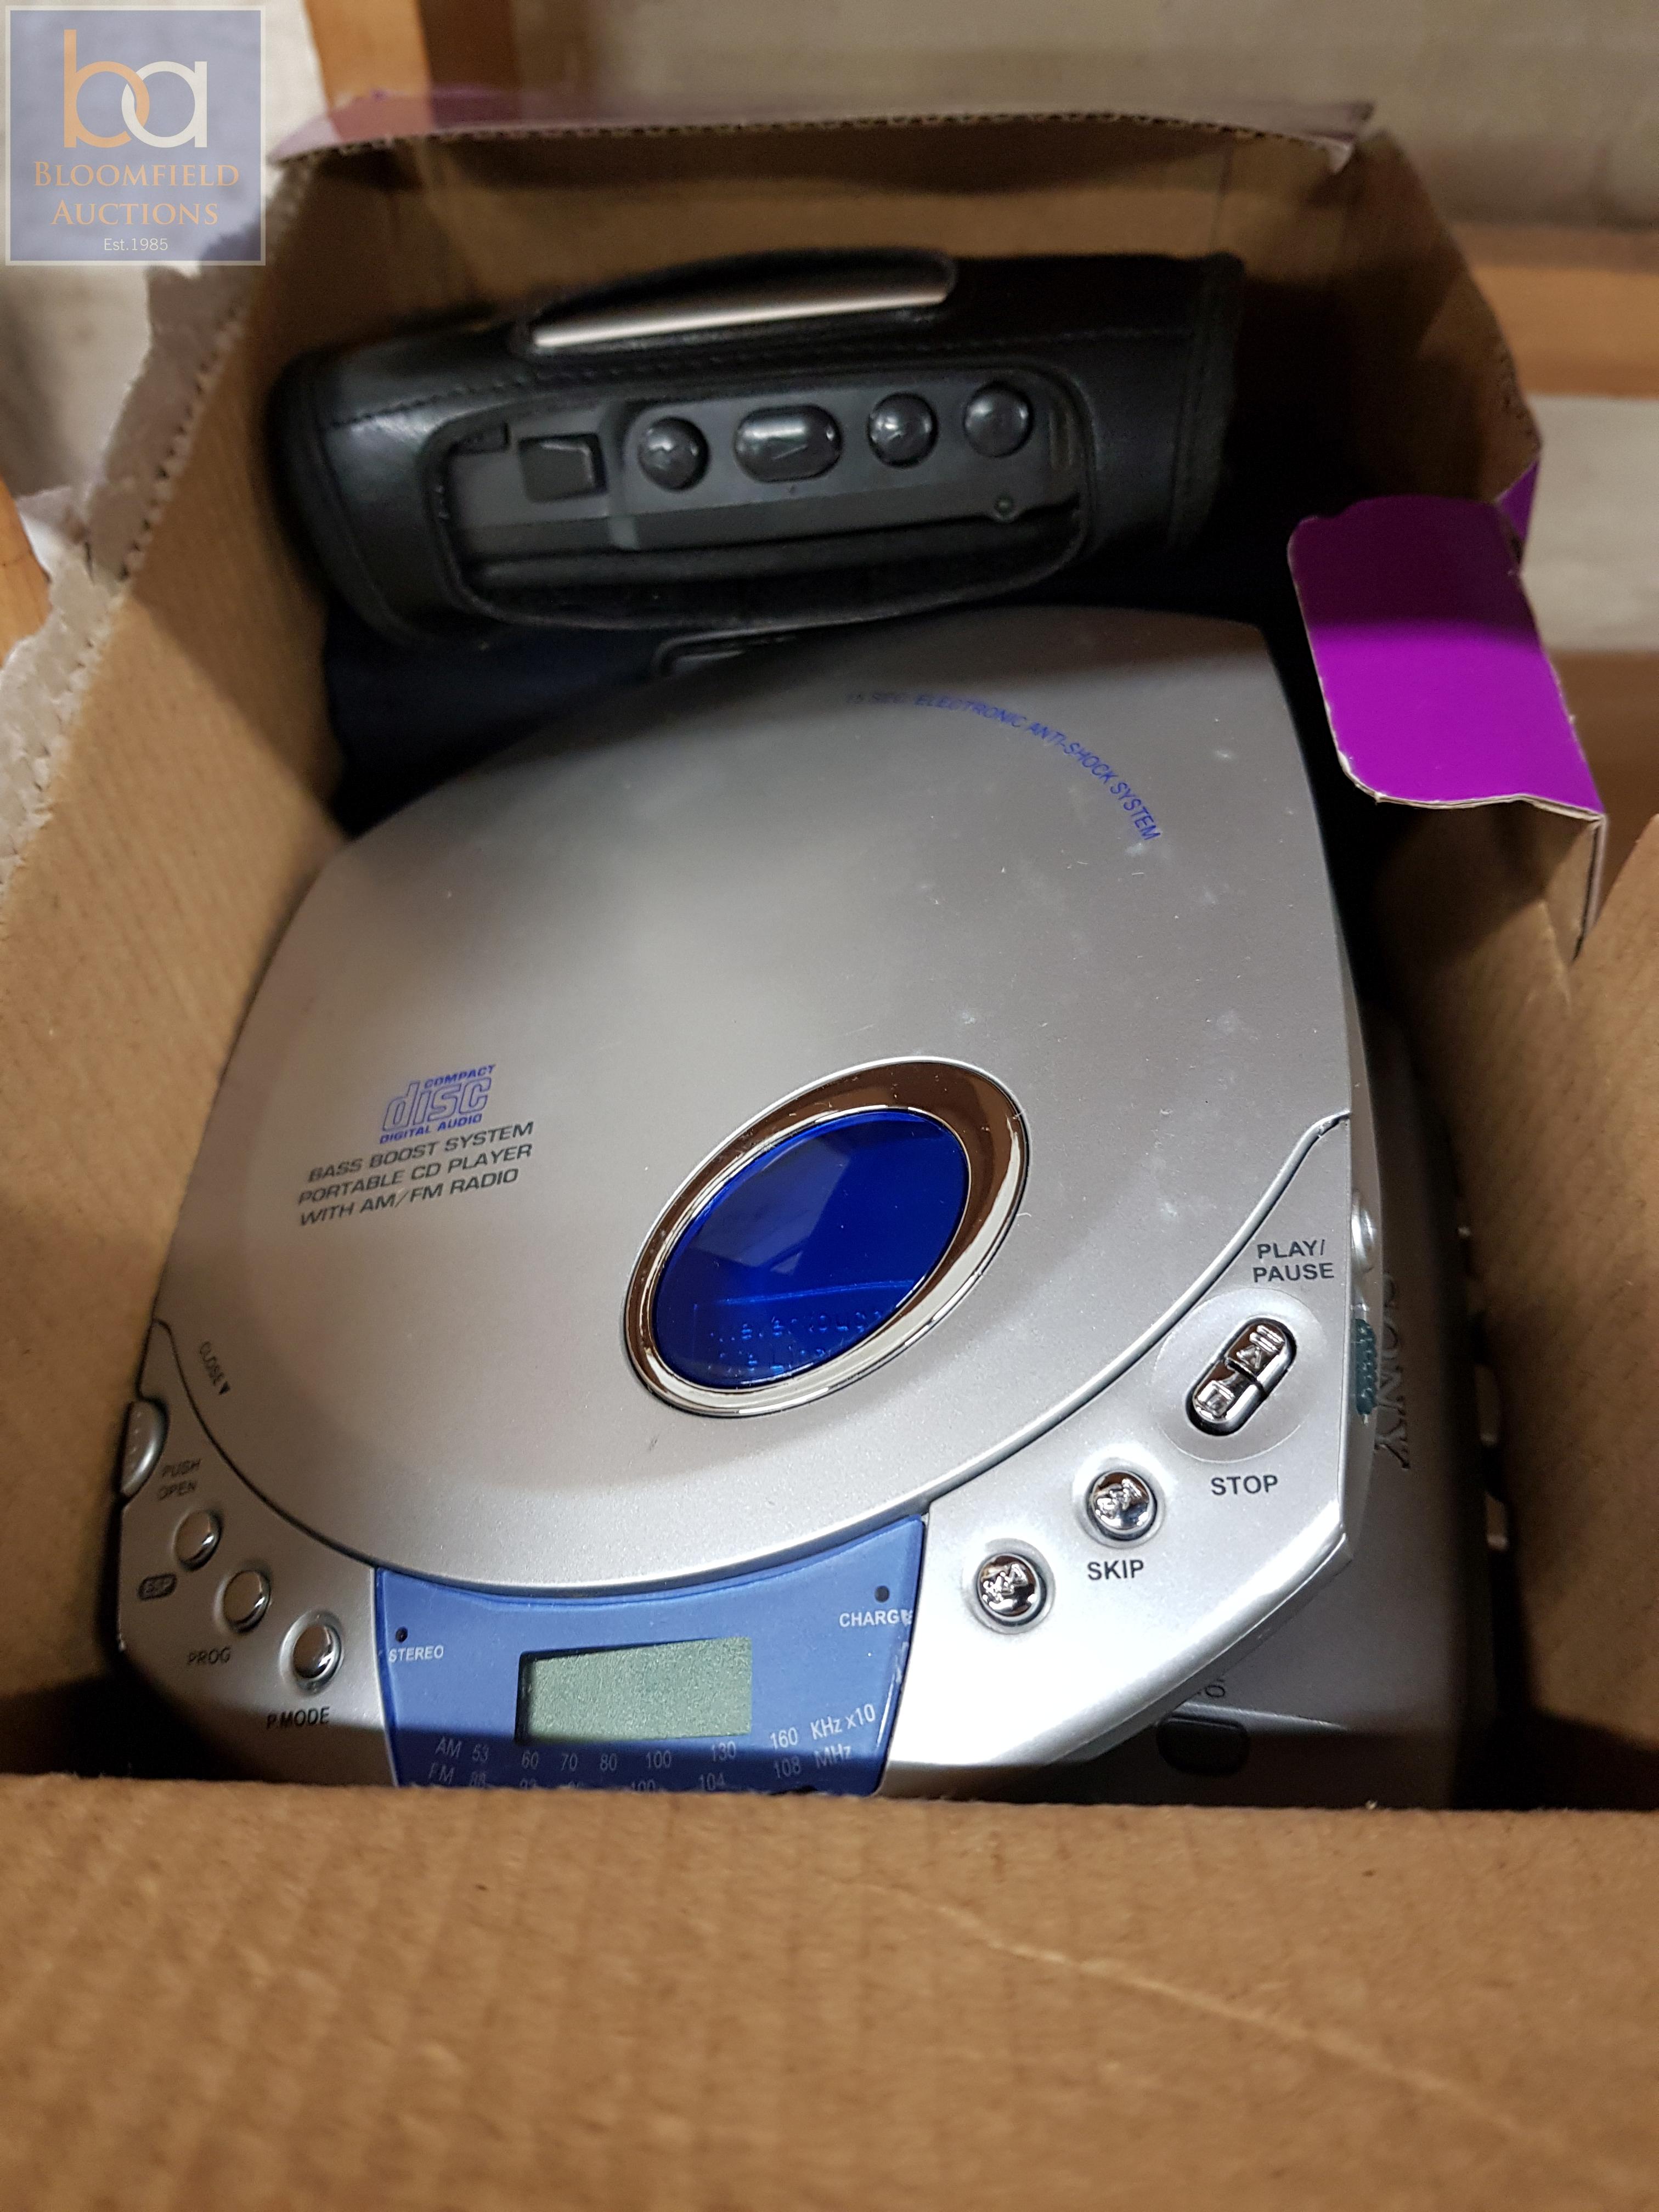 BOX CONTAINING 3 RADIOS, 2 WALKMANS, 2 CD PLAYERS, 2 CAMERAS AND 1 DICTAPHONE